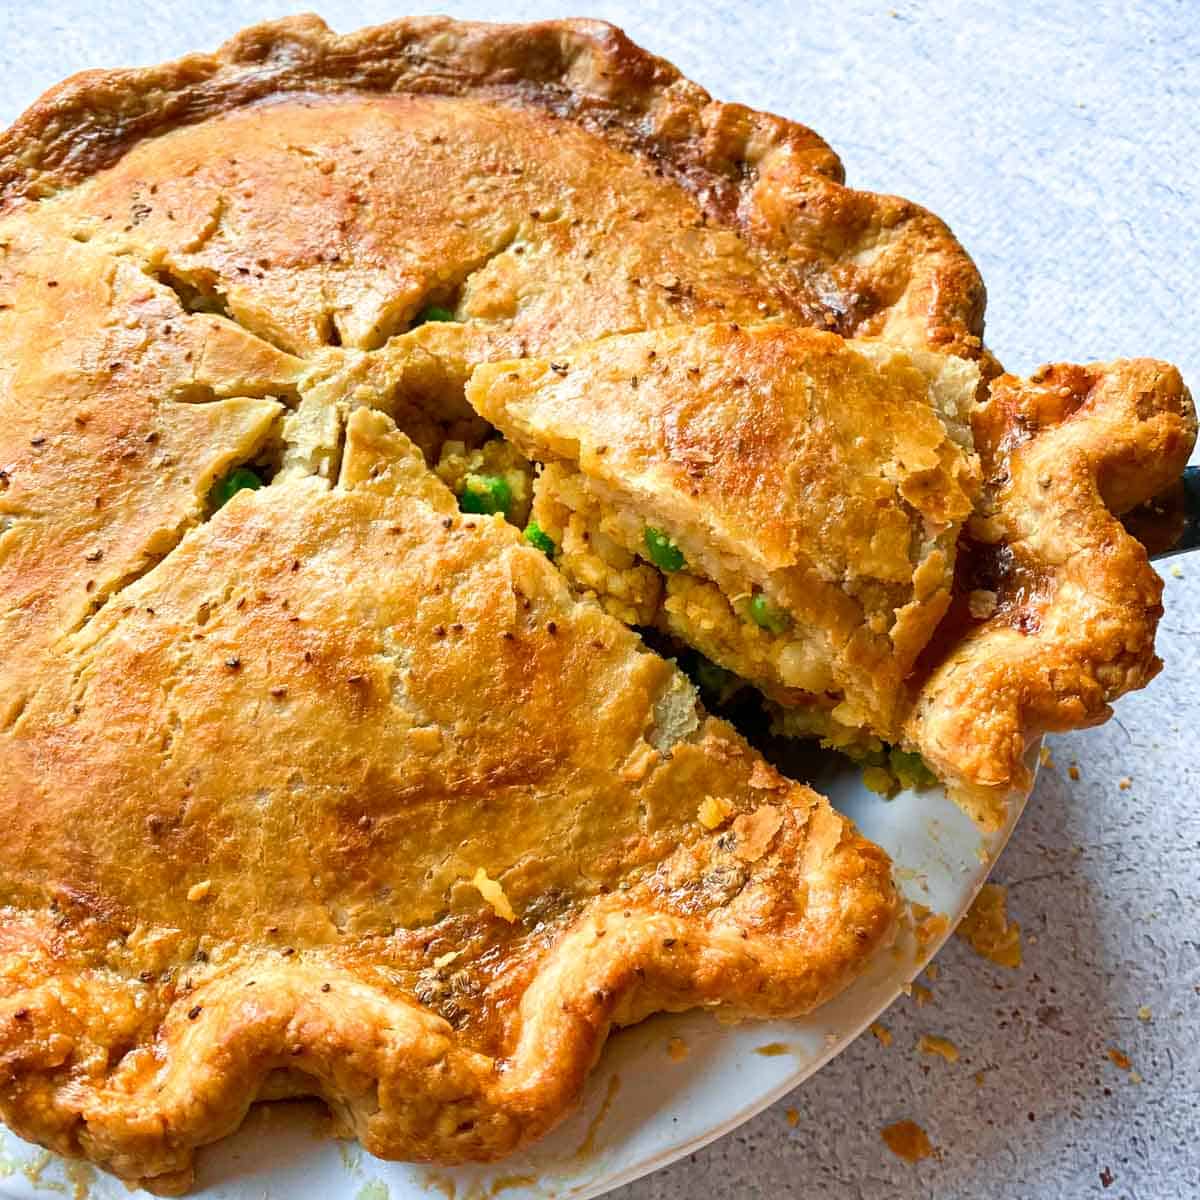 Oven-baked samosa pot pie with potatoes and peas